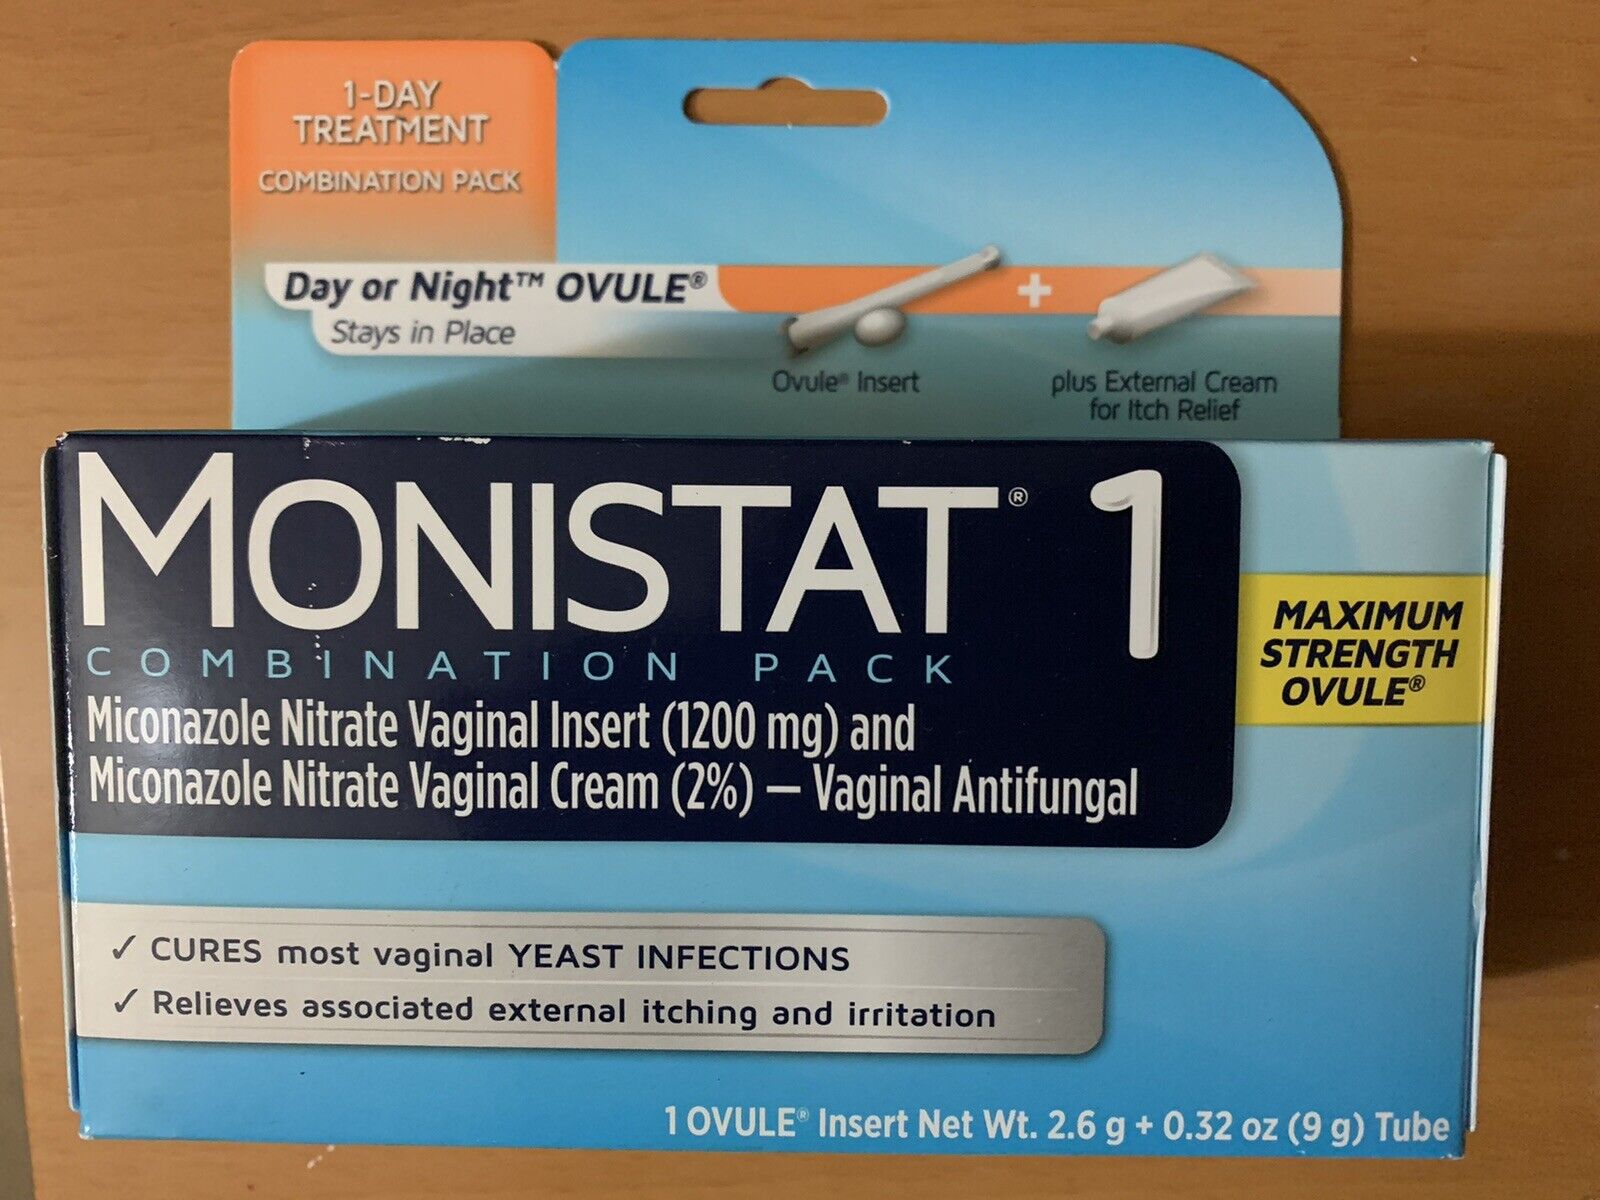 Monistat 1 One Day Treatment or Night Ovule Insert & Anti-Itch Cream EXP 4/2023